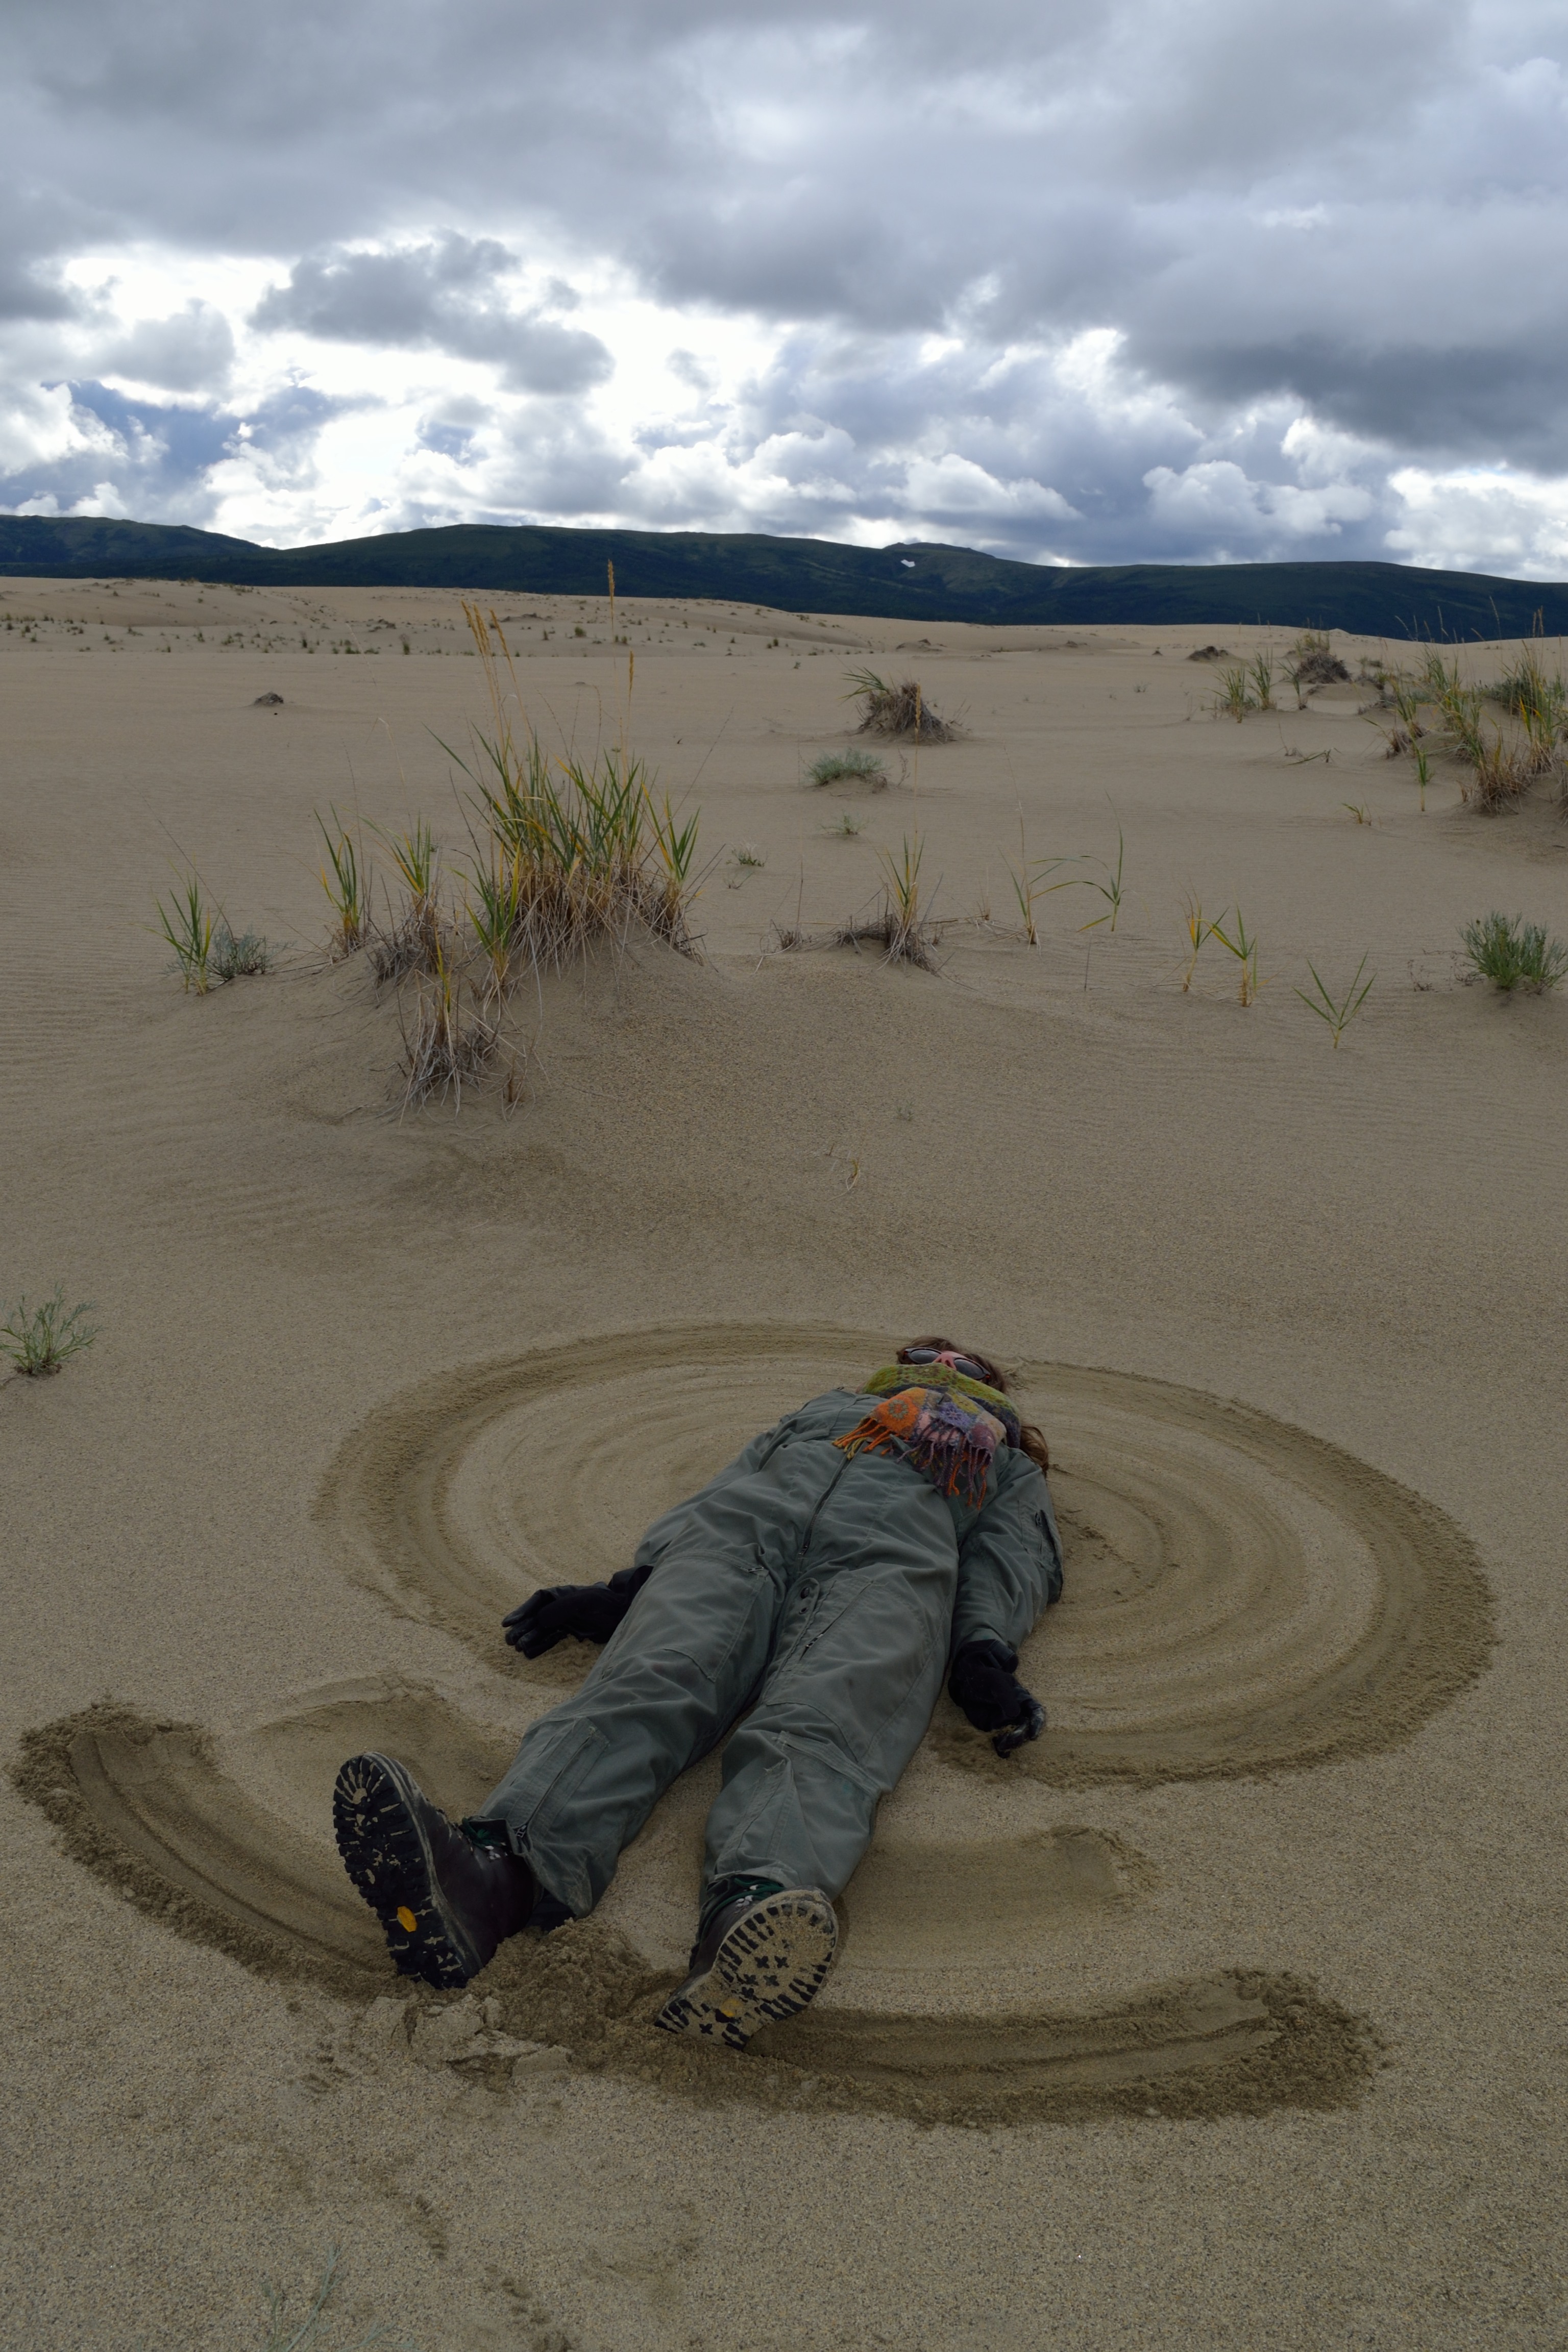 Ranger Thea creates a “sand angel” in the dune. Photo by NPS/Rachel Post.